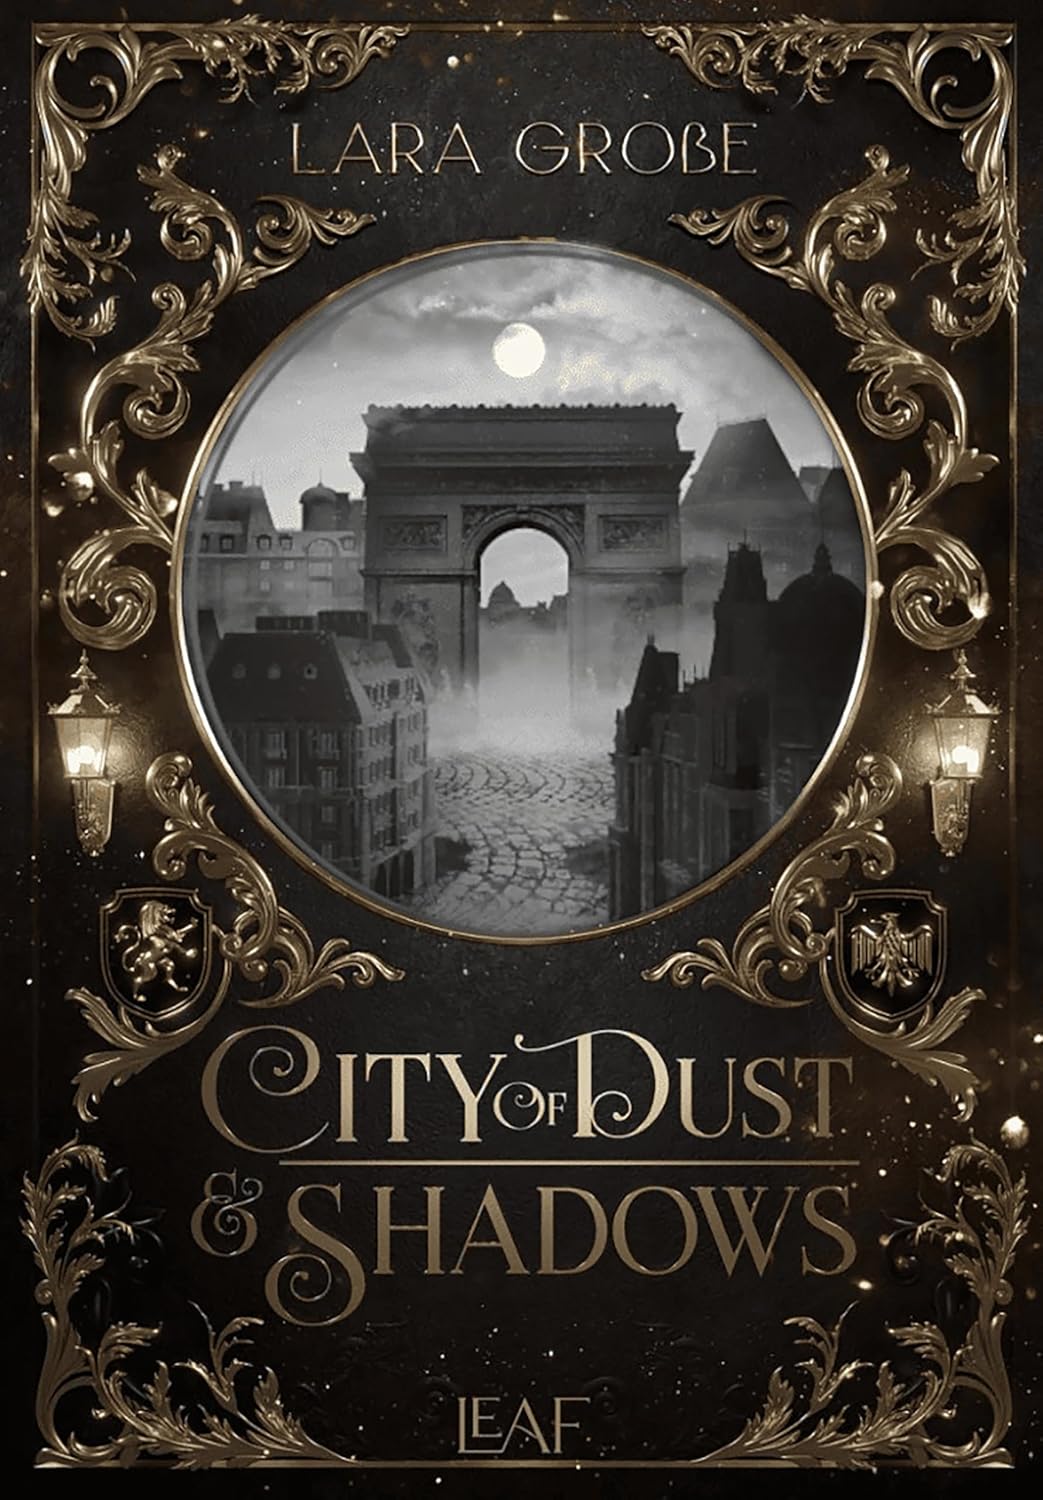 Lara Grosse - City of Dust and Shadows